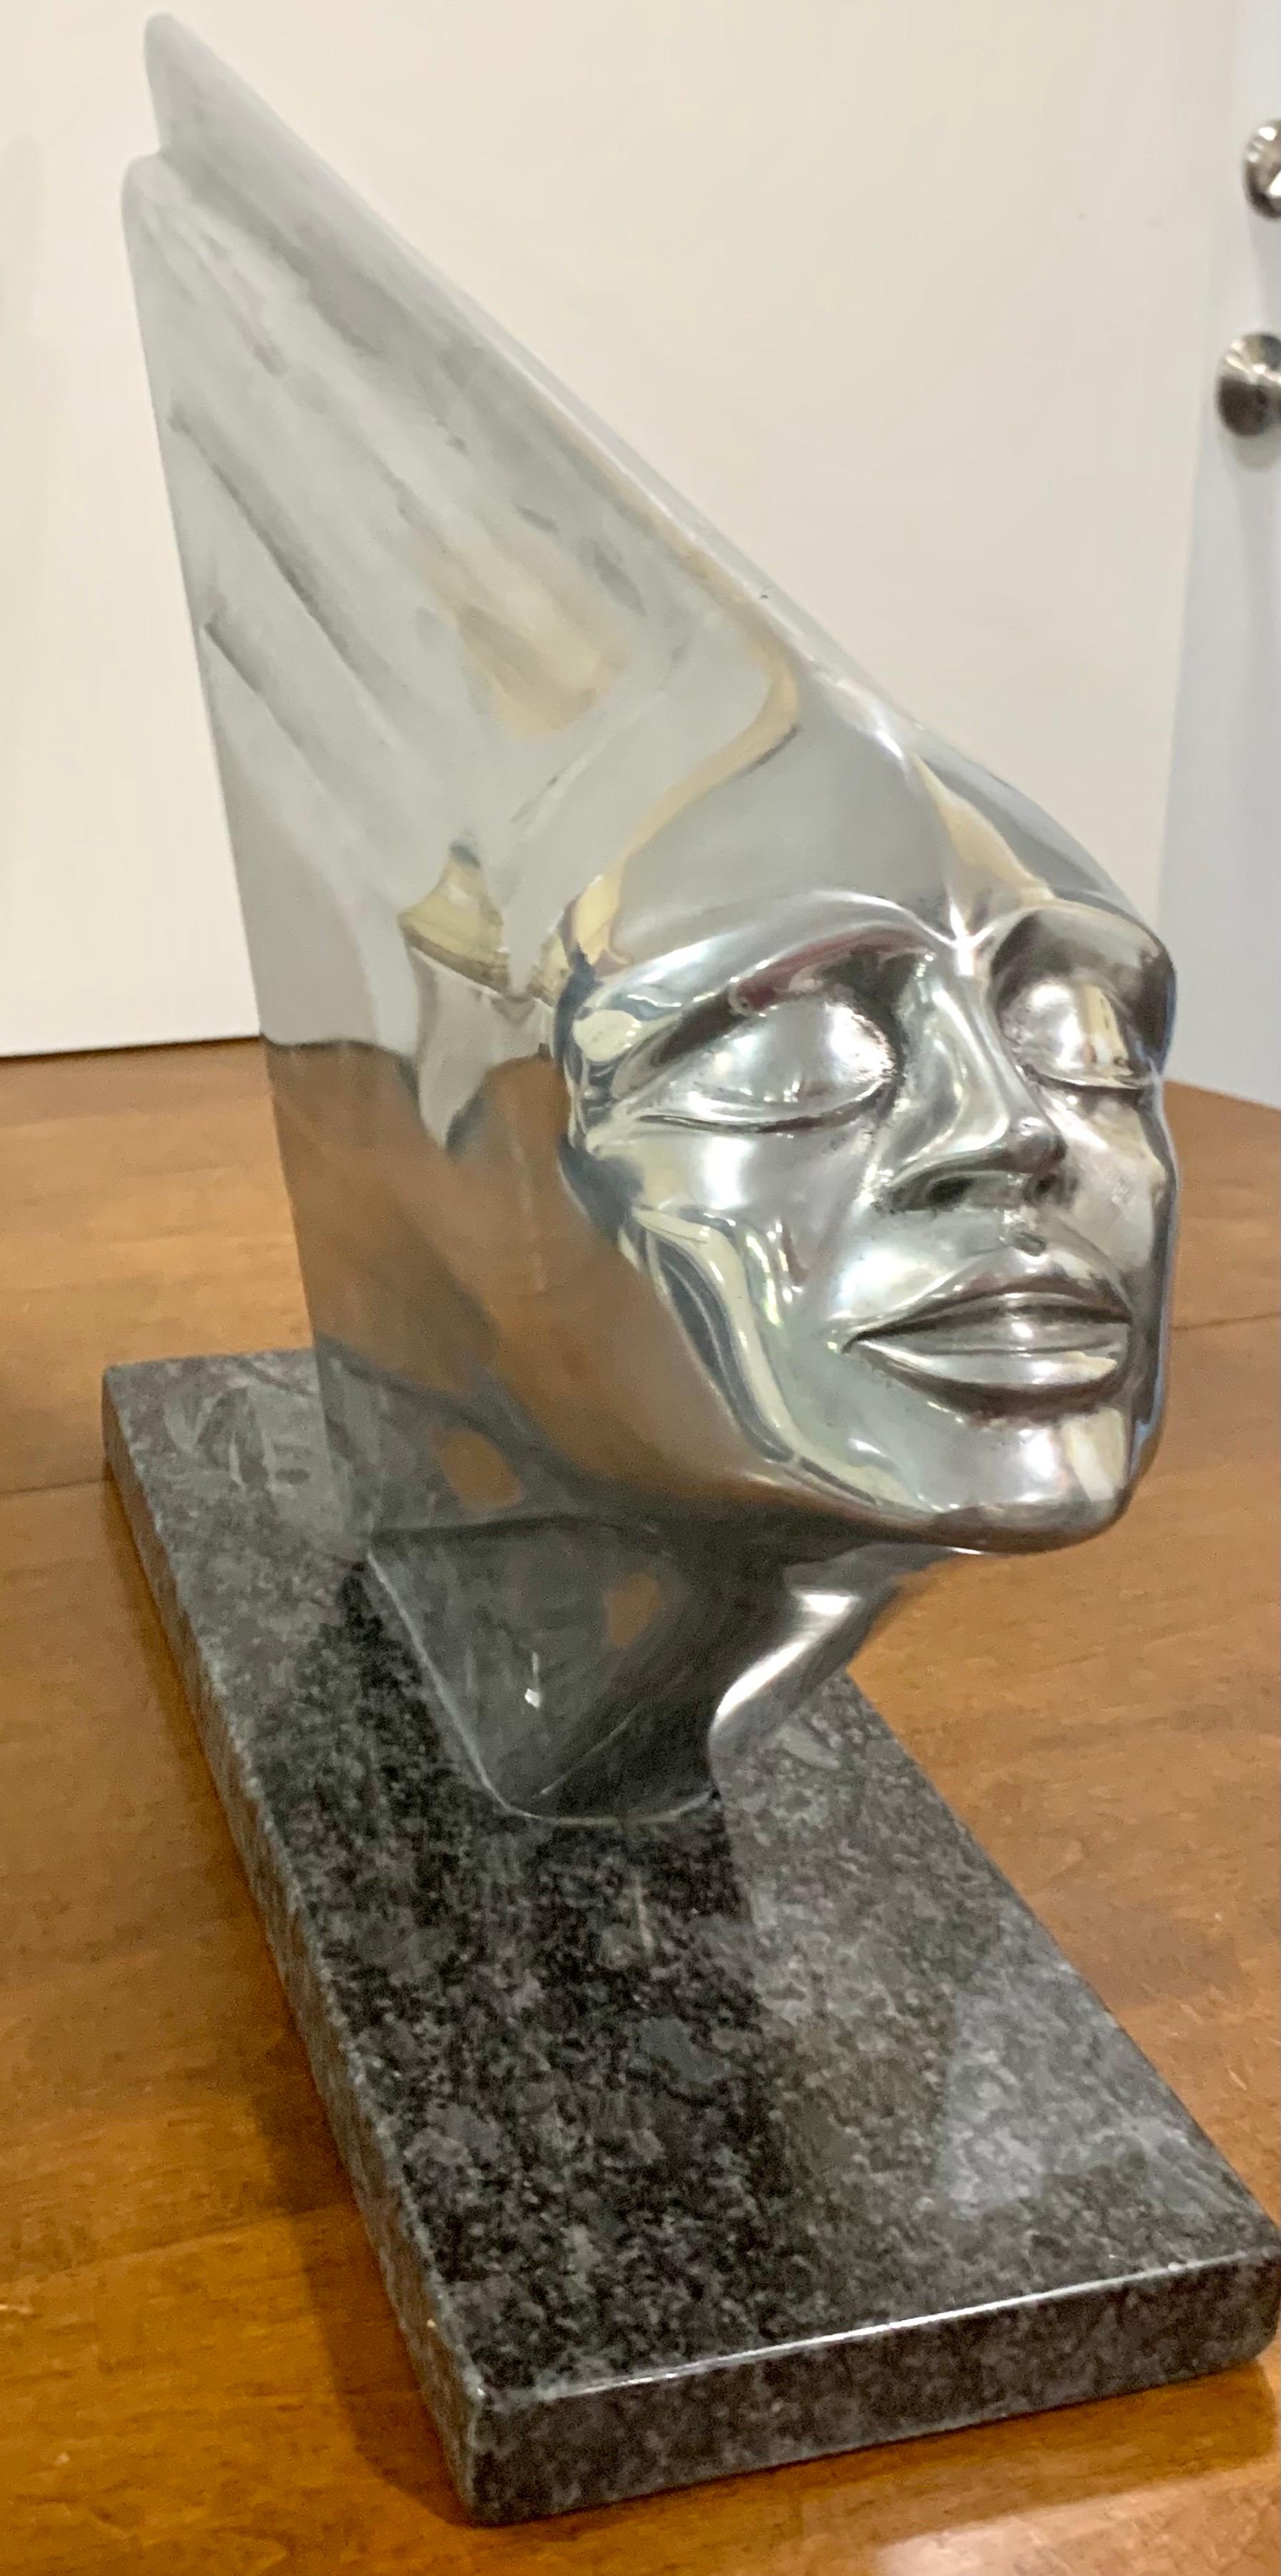 Stunning Lee Duran (1941-2014) aluminum and polished granite sculpture. This important work of art was part of Duran's Chrome Goddess Series Siren Sculptures. There are only five of this sculpture and another five of a slightly smaller sculpture